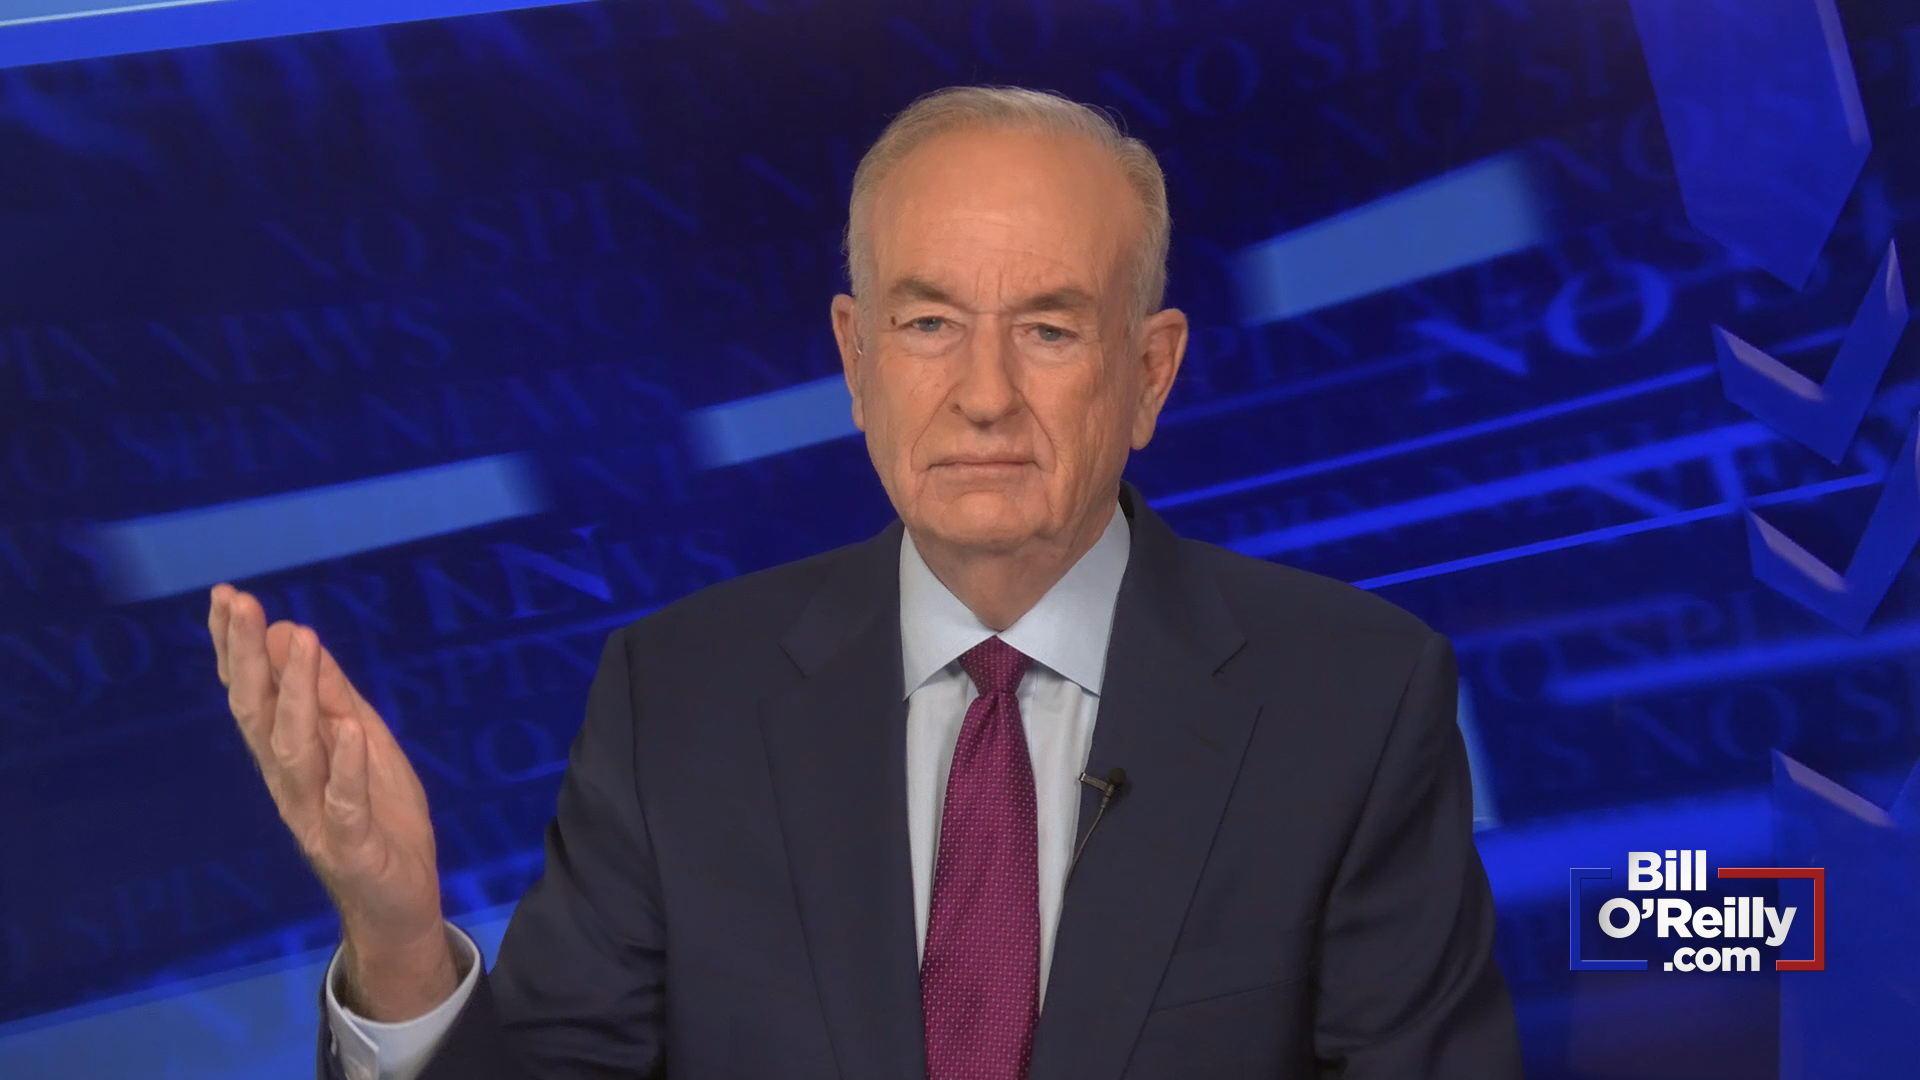 O'Reilly: 'The Media Has No Credibility at All!'